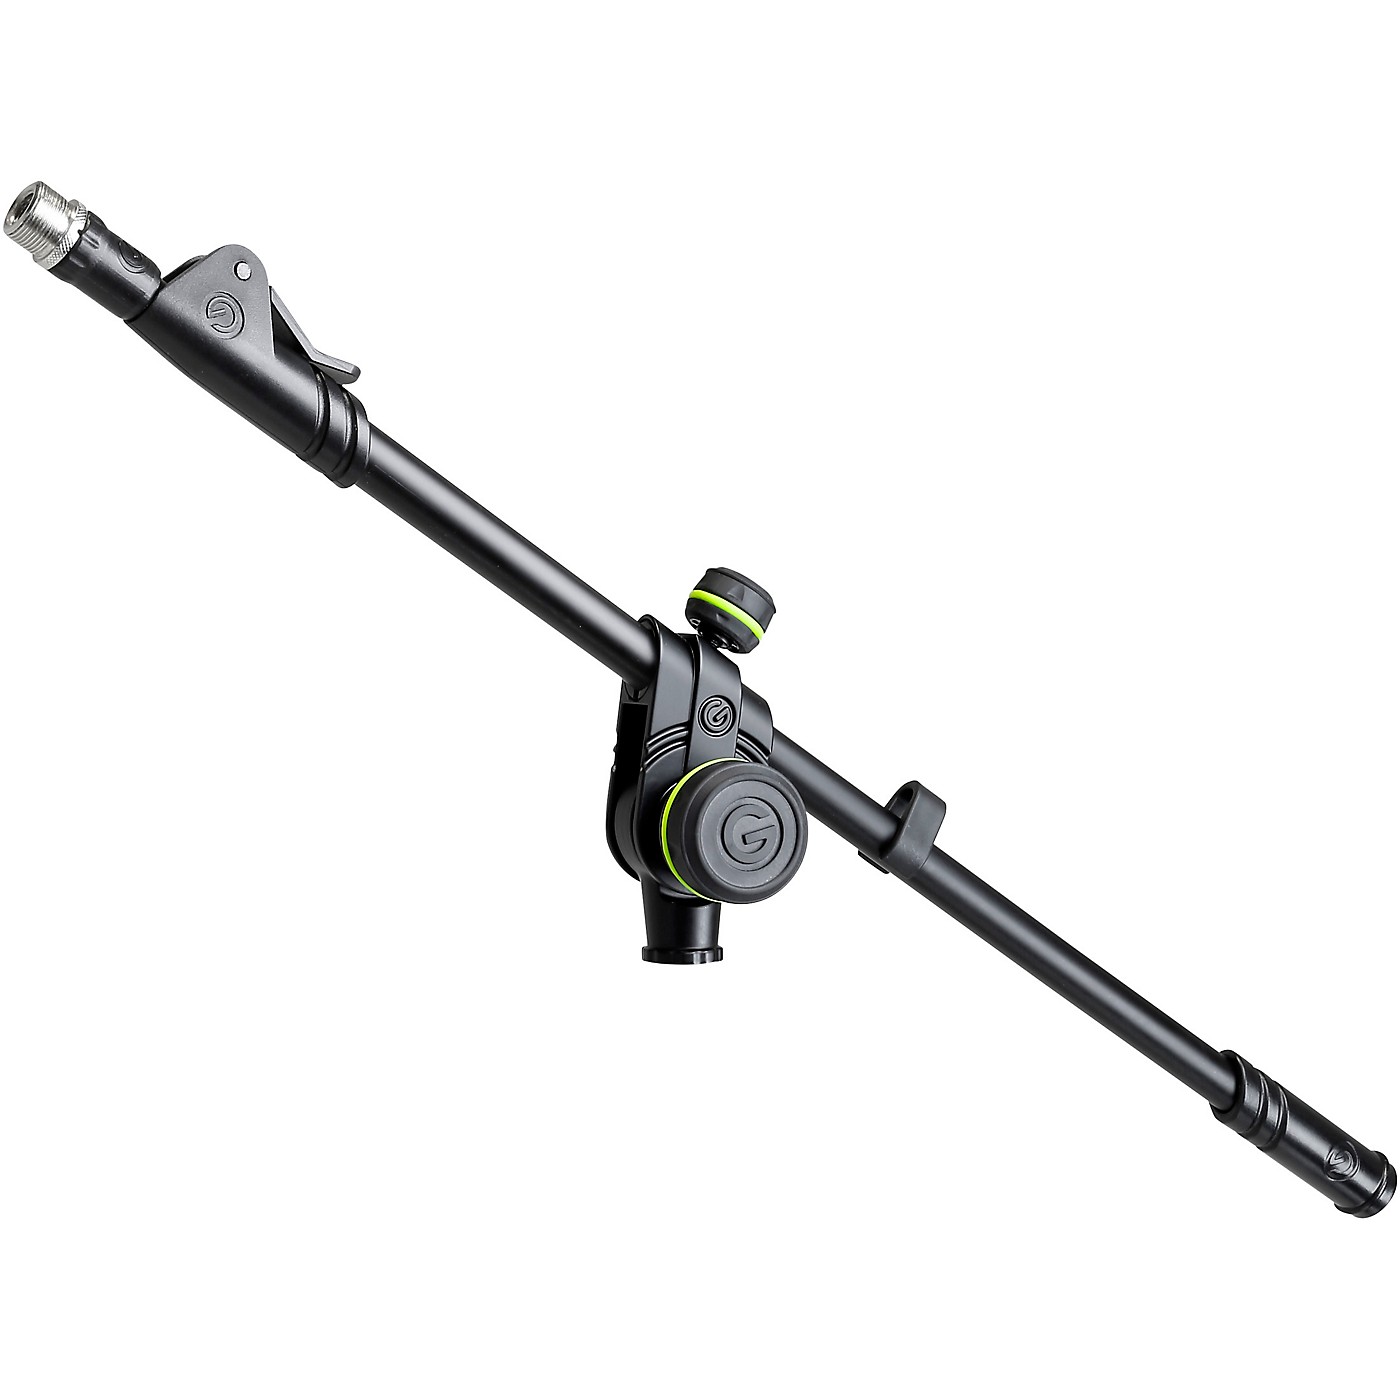 Gravity Stands 2-Point Adjustment Telescoping Boom Arm thumbnail